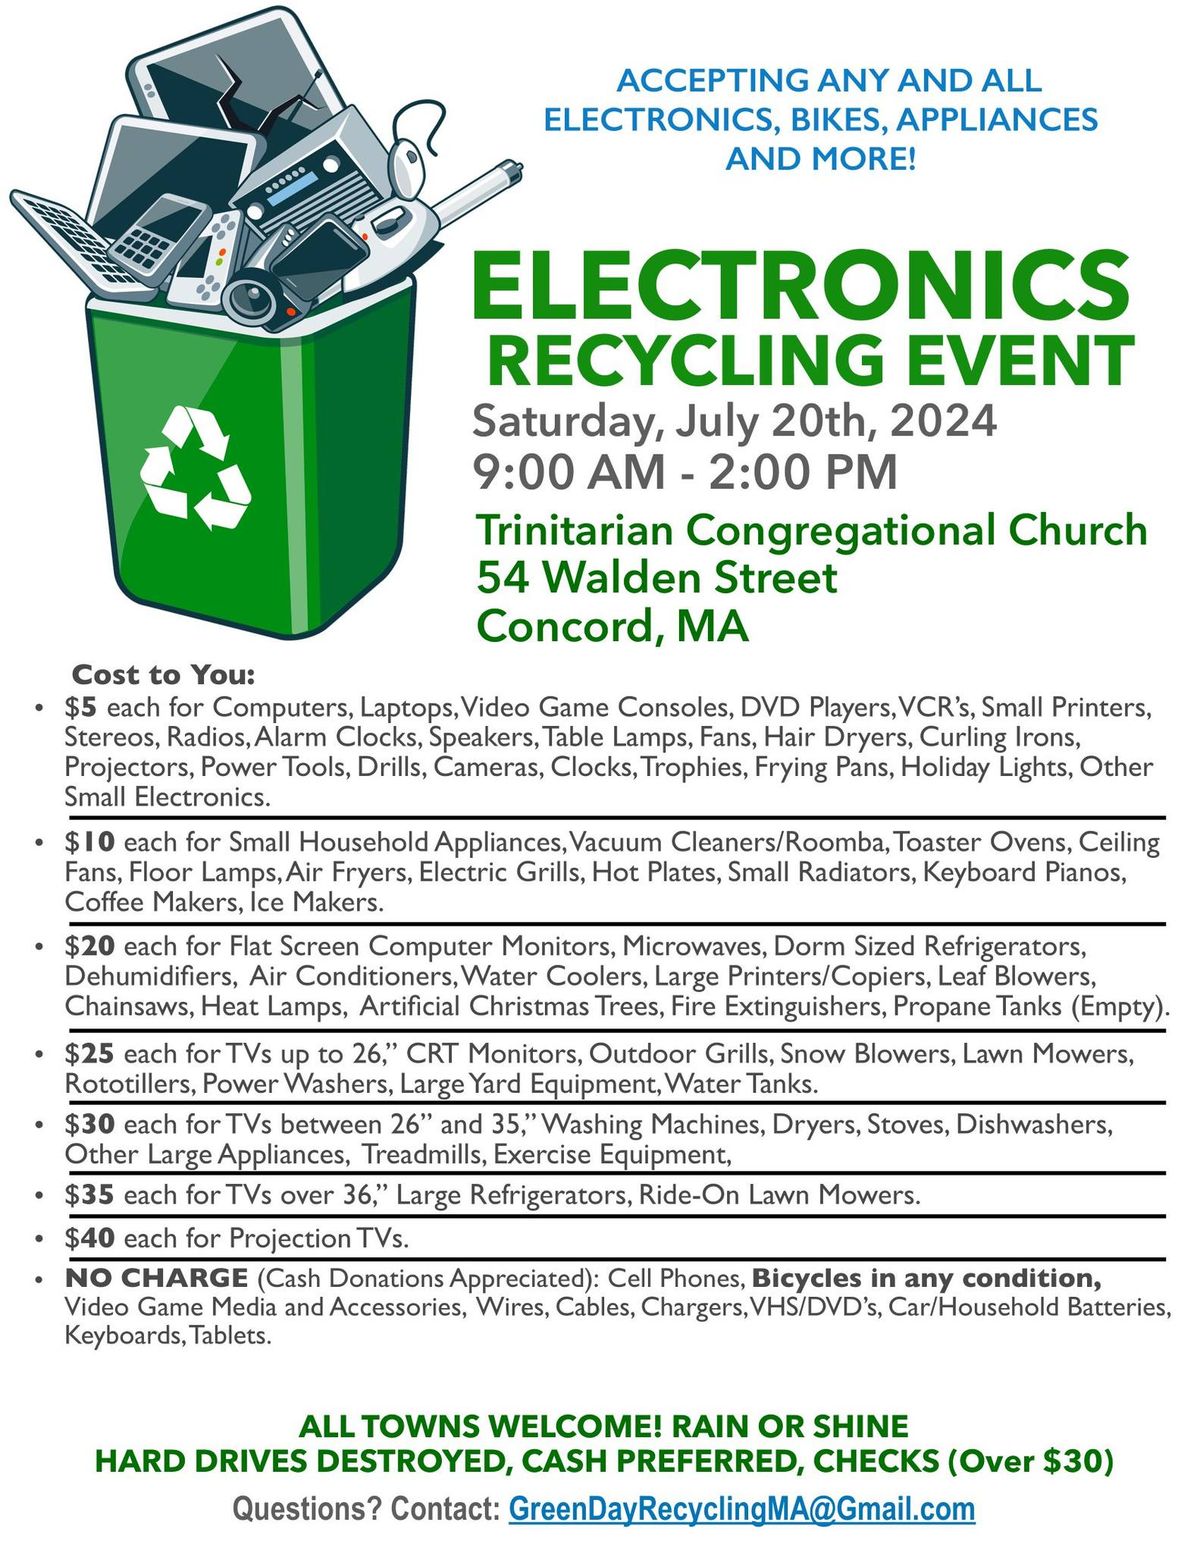 Concord Electronics Recycling Event